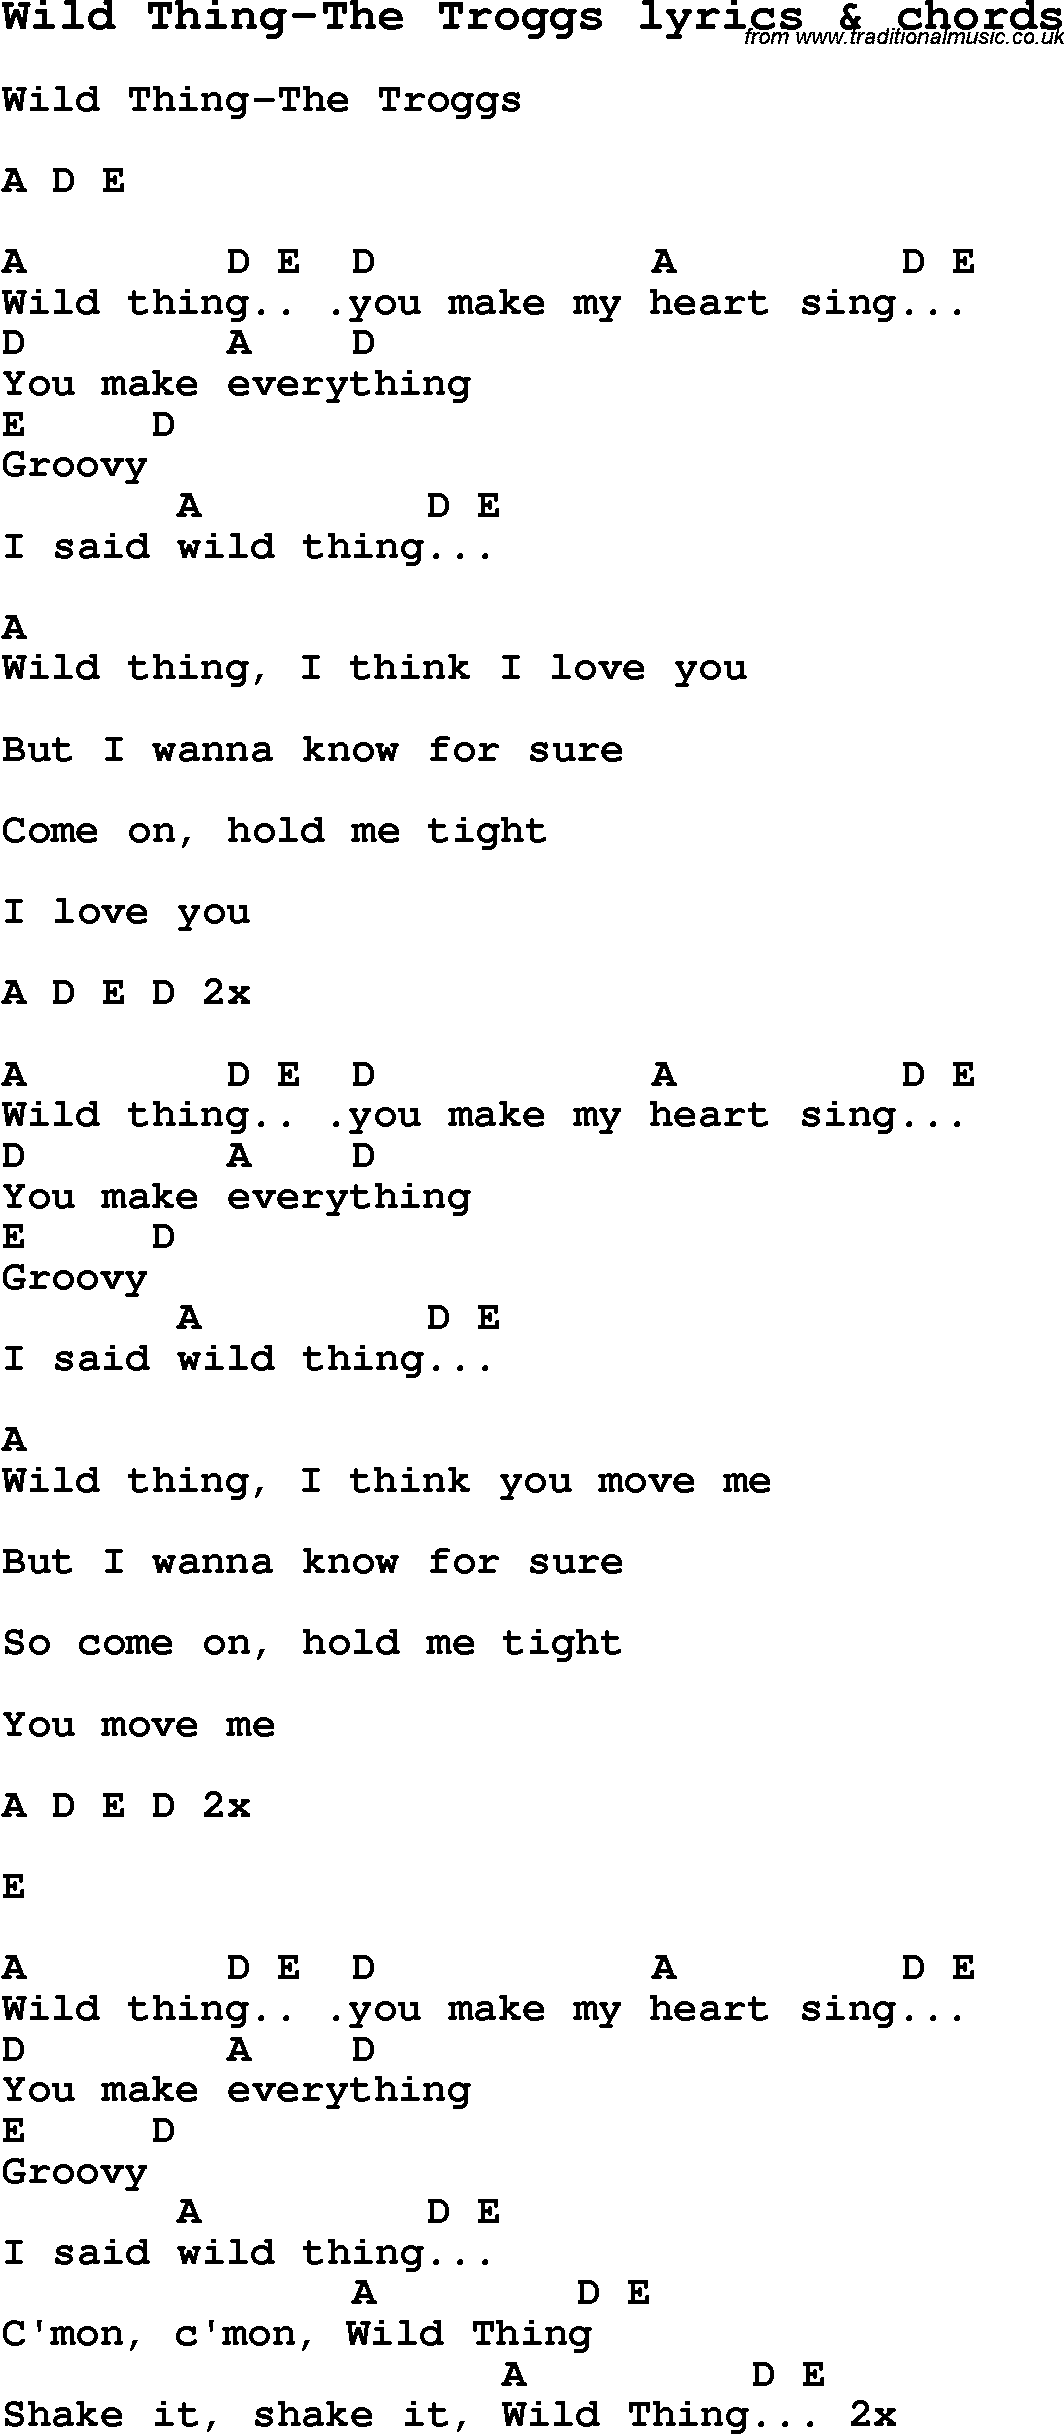 Love Song Lyrics for: Wild Thing-The Troggs with chords for Ukulele, Guitar Banjo etc.